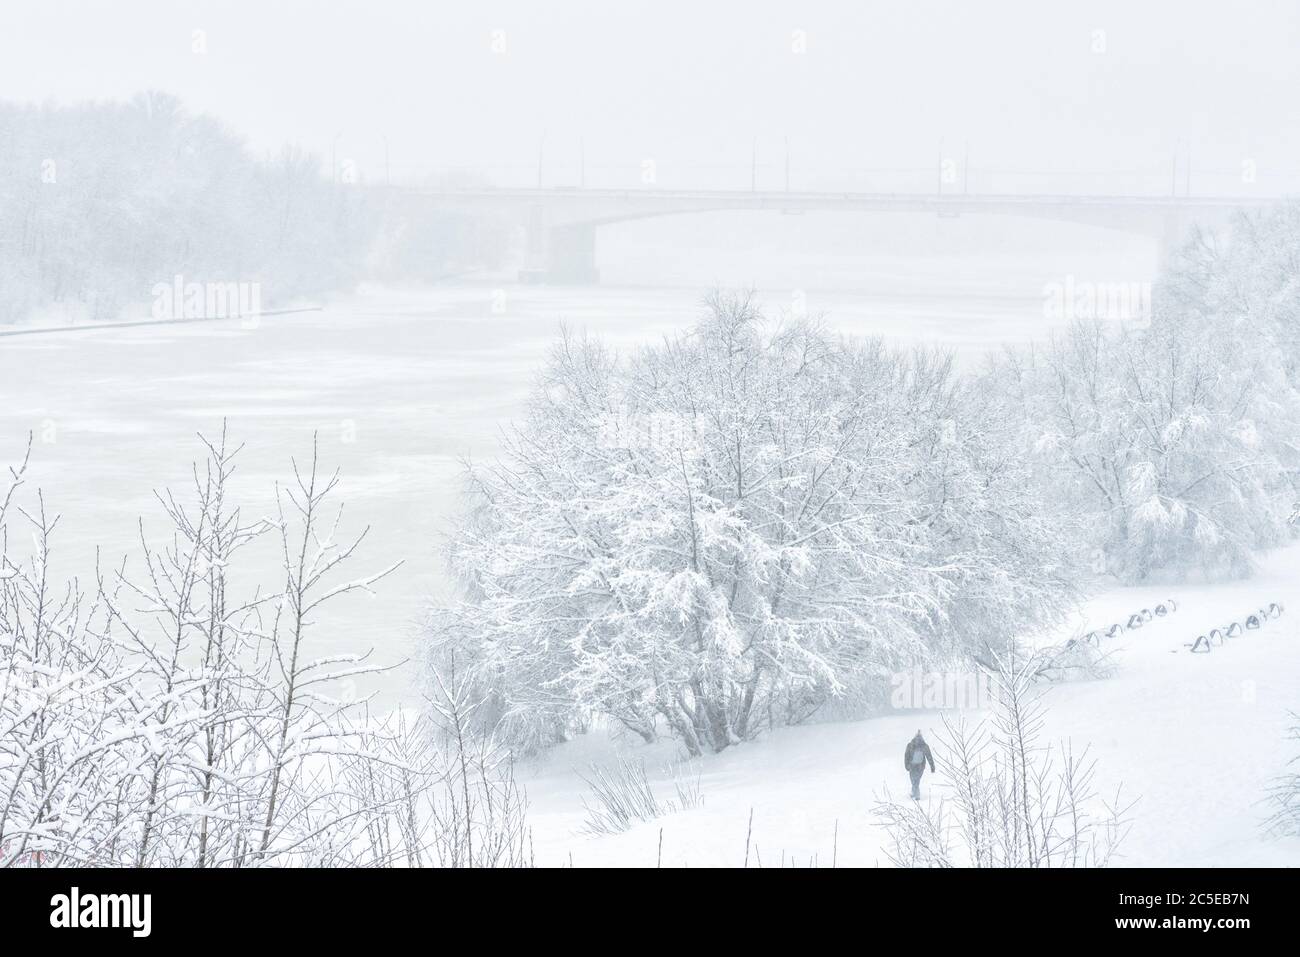 Winter landscape, Moscow, Russia. Man walks in the park near icy Moskva River during snowfall. Winter nature background. Scenic view of a snowy beach Stock Photo